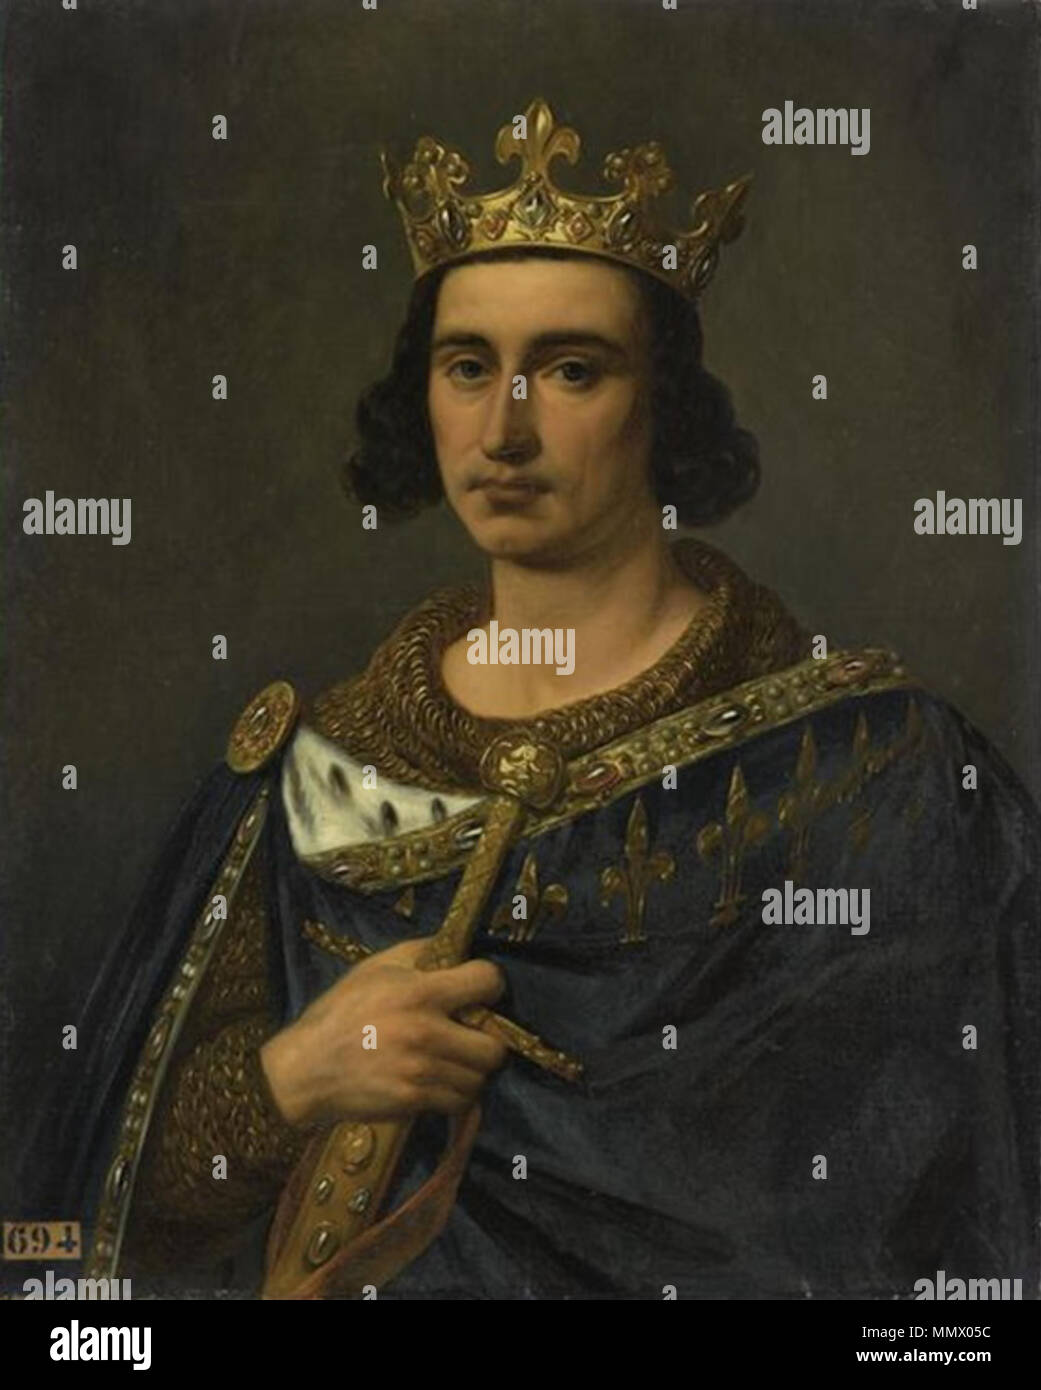 .   Portraits of Kings of France is a serie of portraits commissioned between 1837 and 1838 by Louis Philippe I and painted by various artists for the Musée historique de Versailles.   French: Louis IX (1215-1270) dit Saint-Louis, roi de France. 1837. Decreuse - Louis IX of France Stock Photo